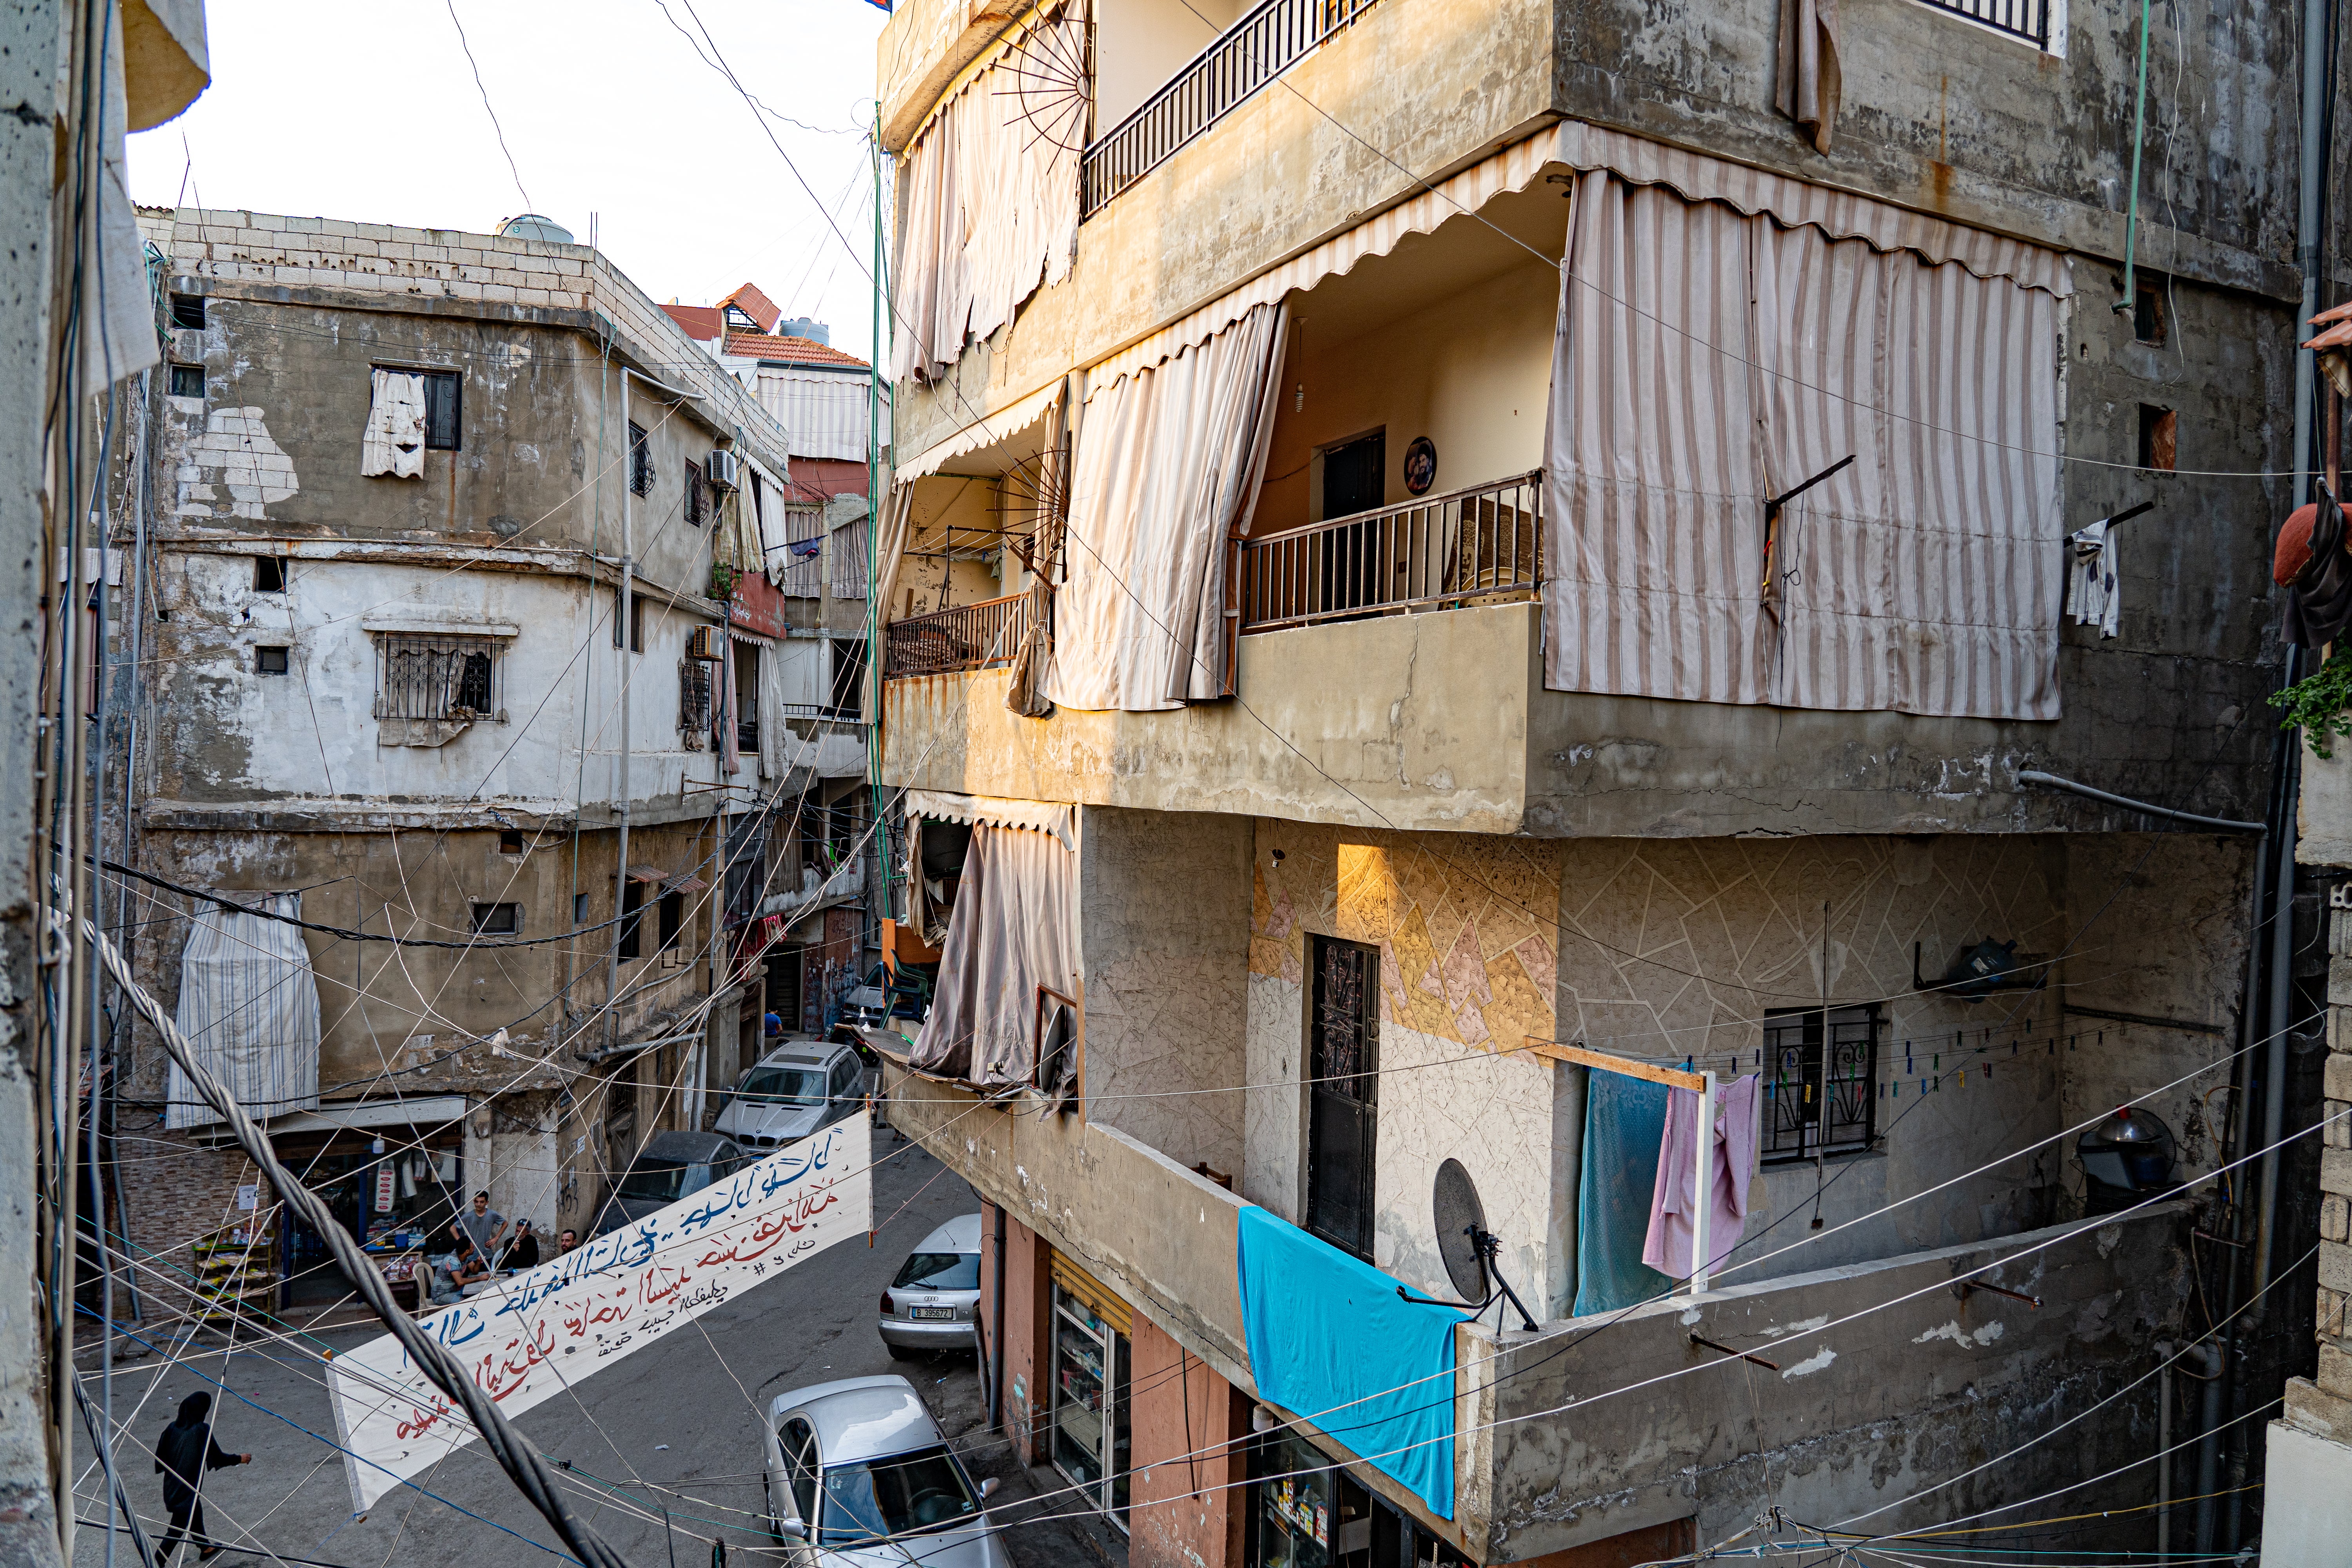 The run-down neighbourhood of Beirut where Firas lived with his family